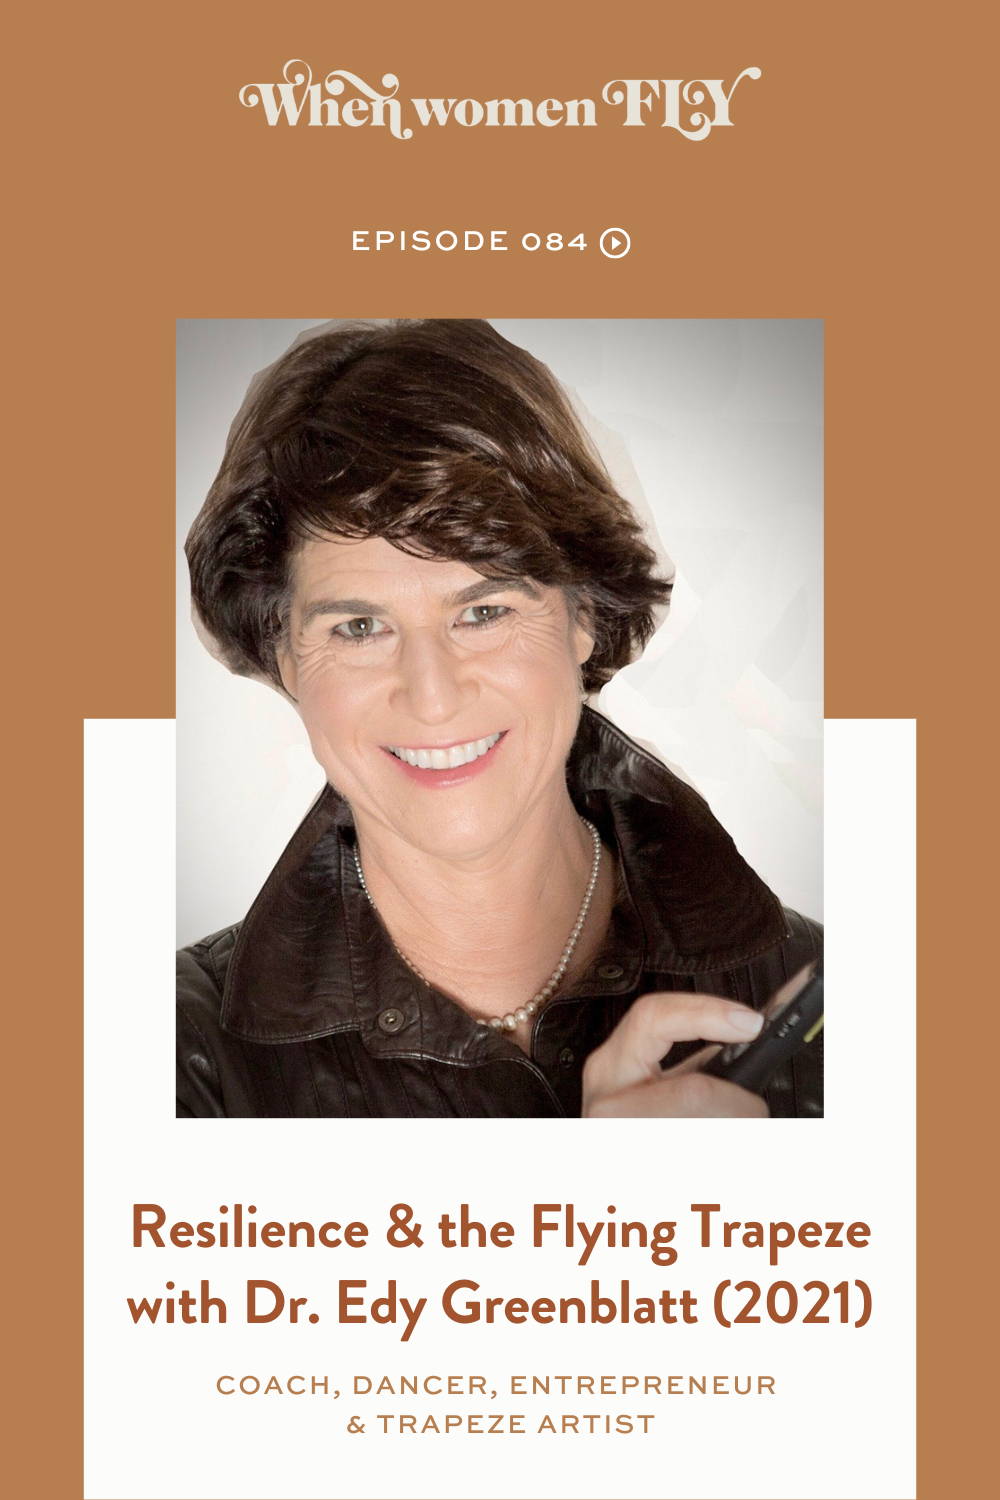 Resilience and the Flying Trapeze with Dr. Edy Greenblatt - Entrepreneur, Coach, and Dancer (2021)